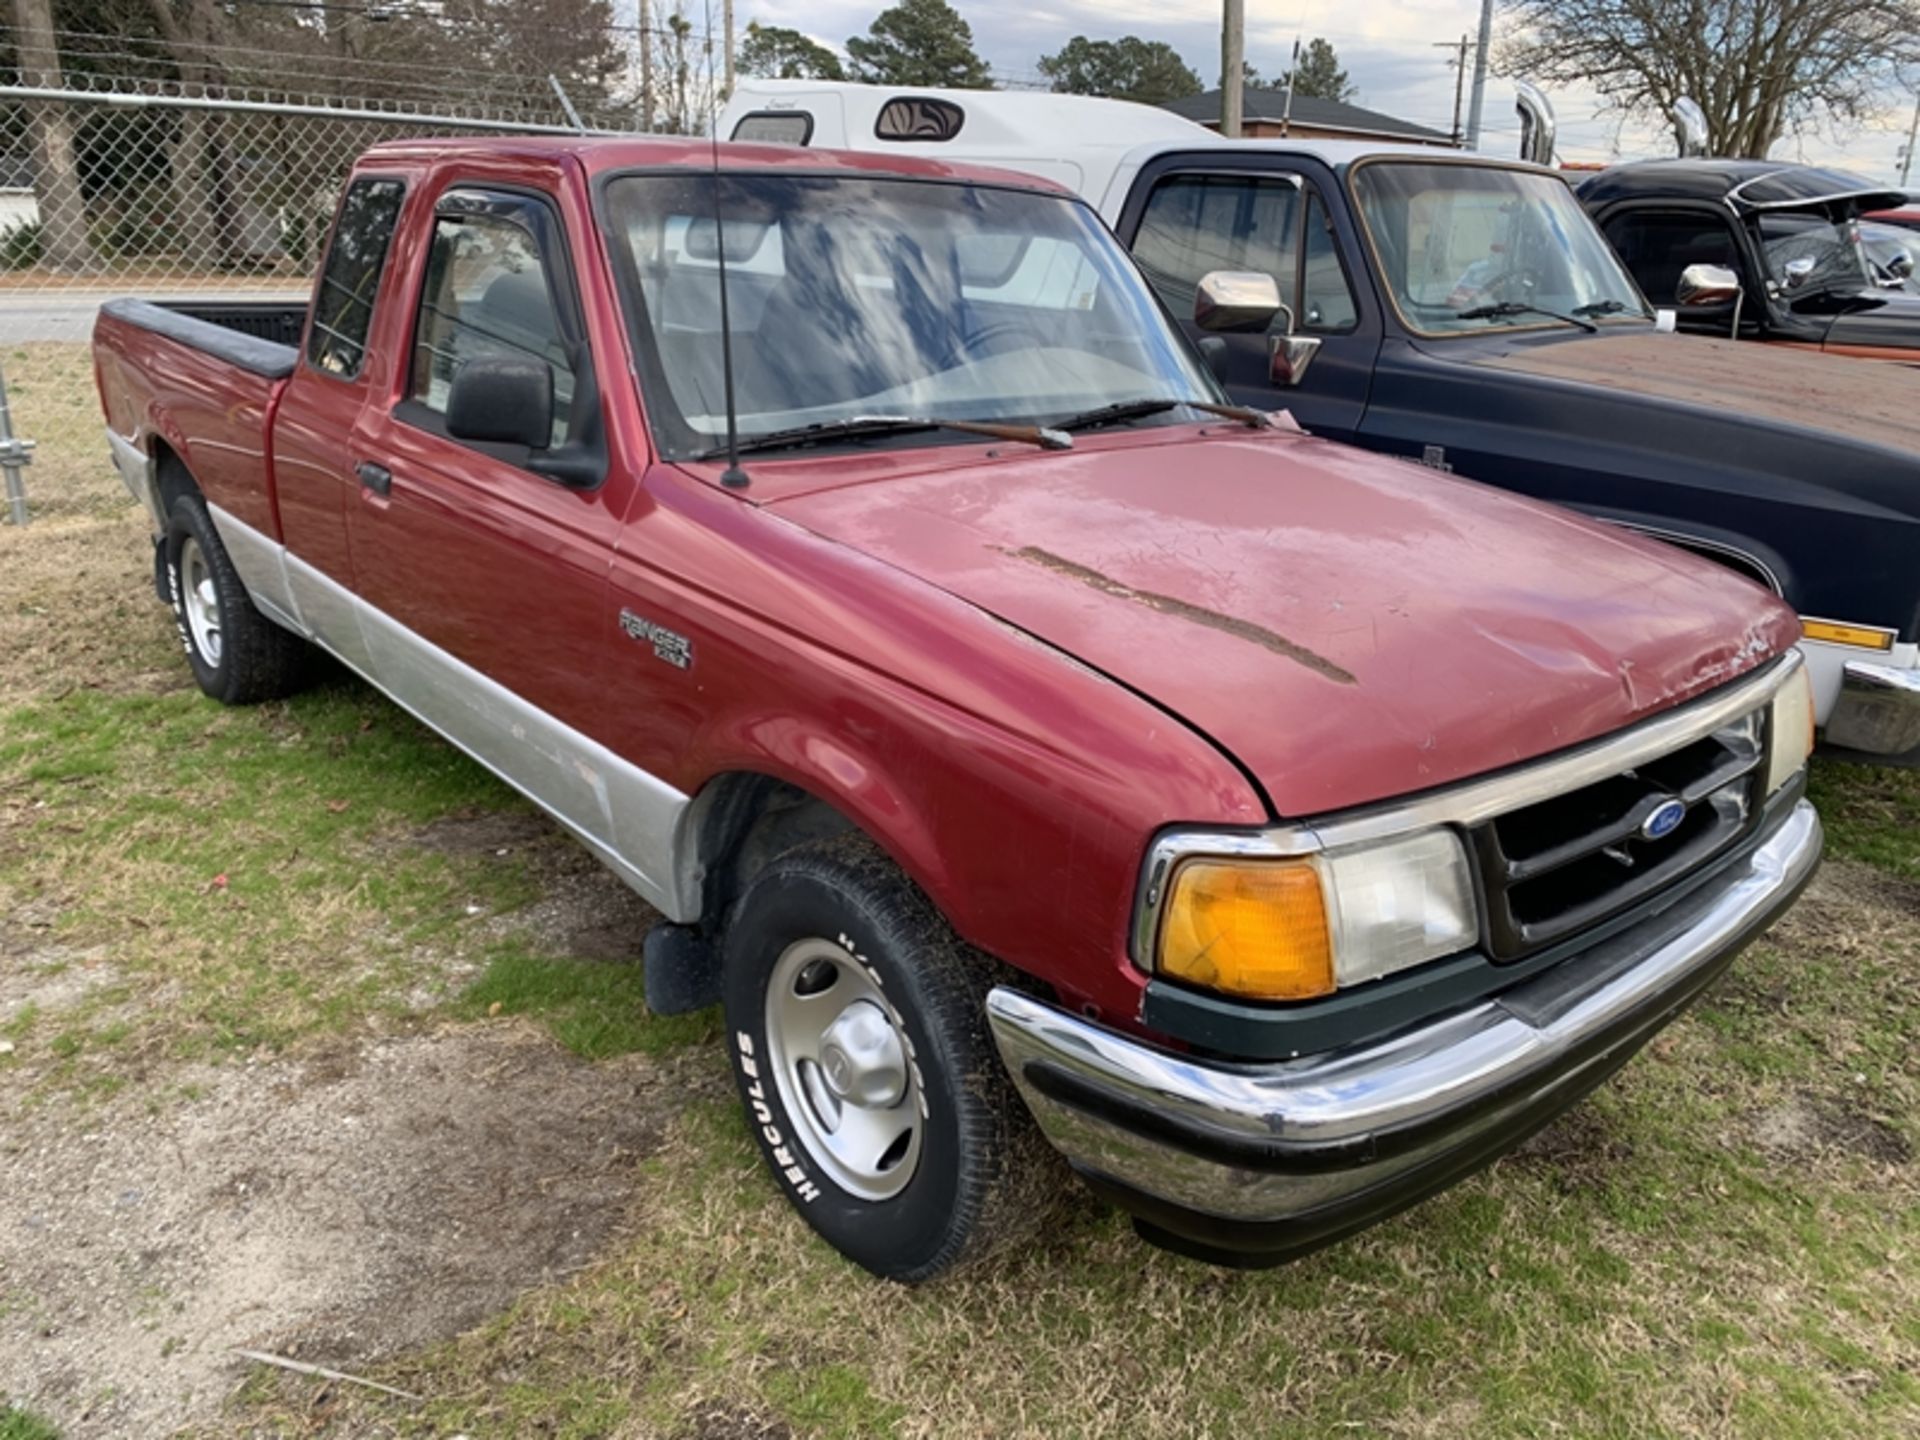 1995 FORD Ranger XLT - 136,915 miles showing - 1FTCR14U1STA06218 - Image 2 of 6